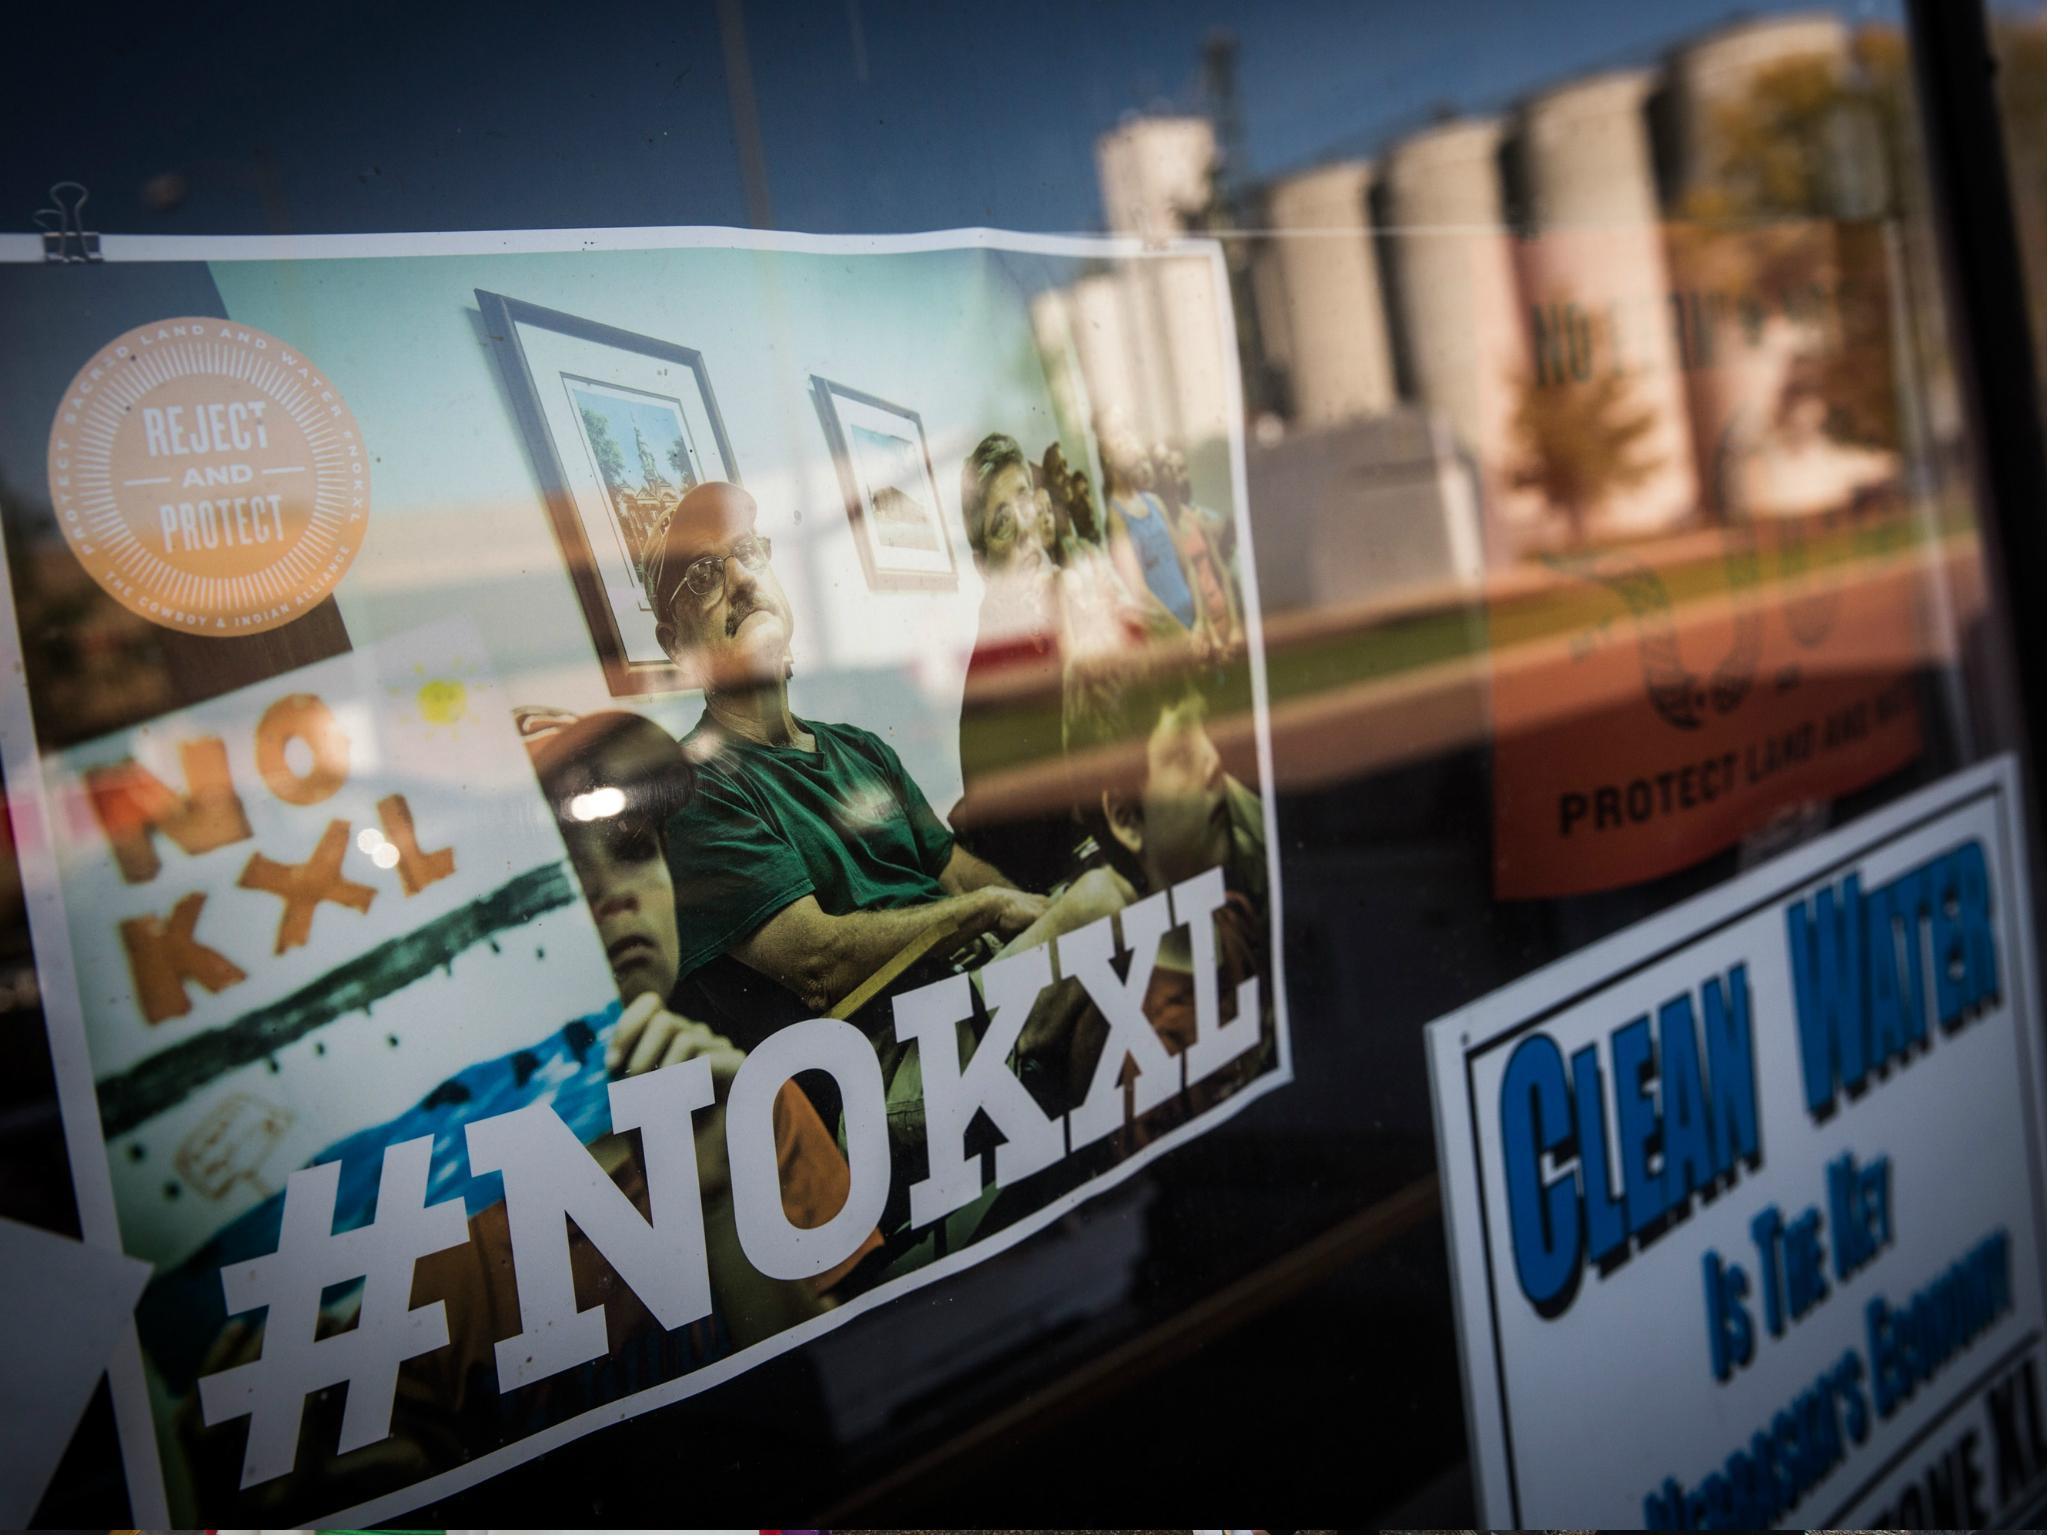 Signs against the proposed Keystone XL pipeline are taped to the window a hardware store on 11 October 2014 in Polk, Nebraska.